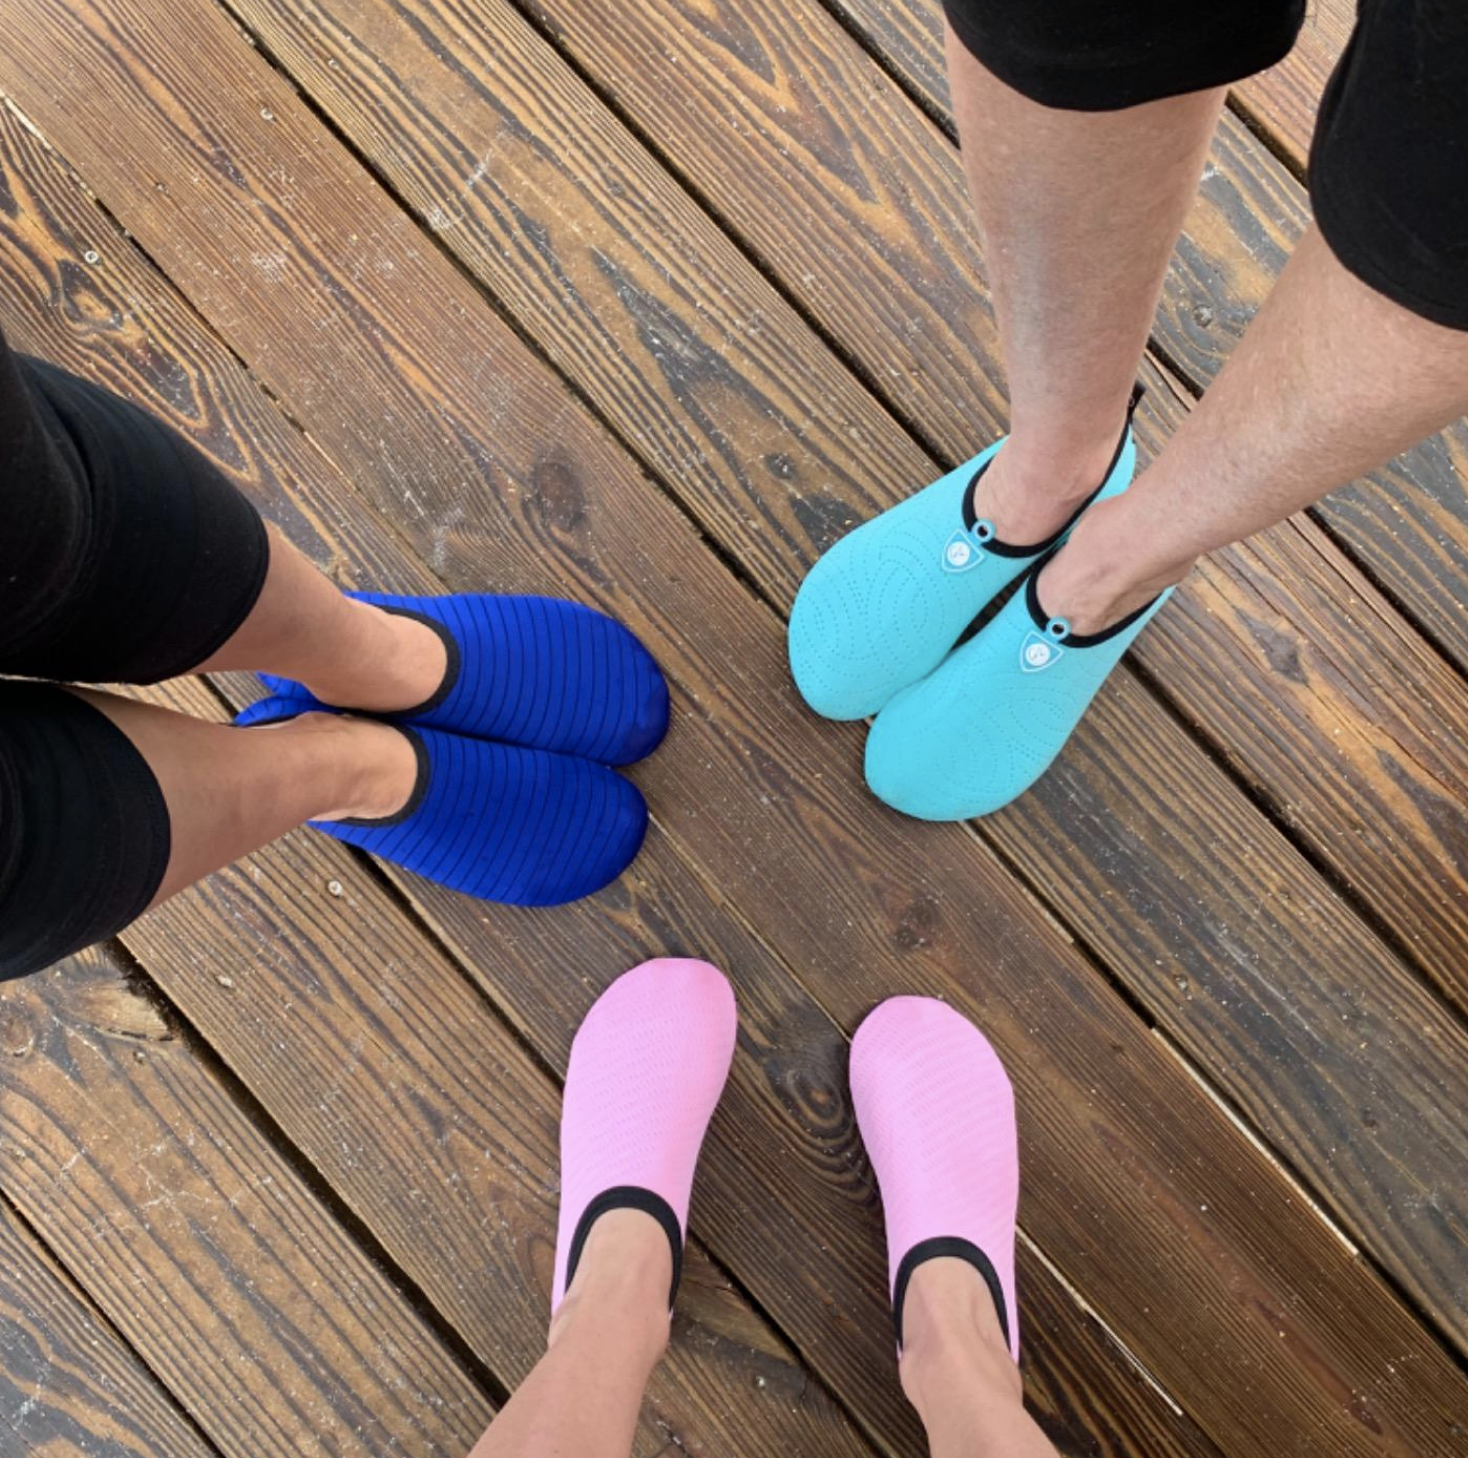 Three reviewers&#x27; feet wearing the workout socks in blue, light blue, and pink